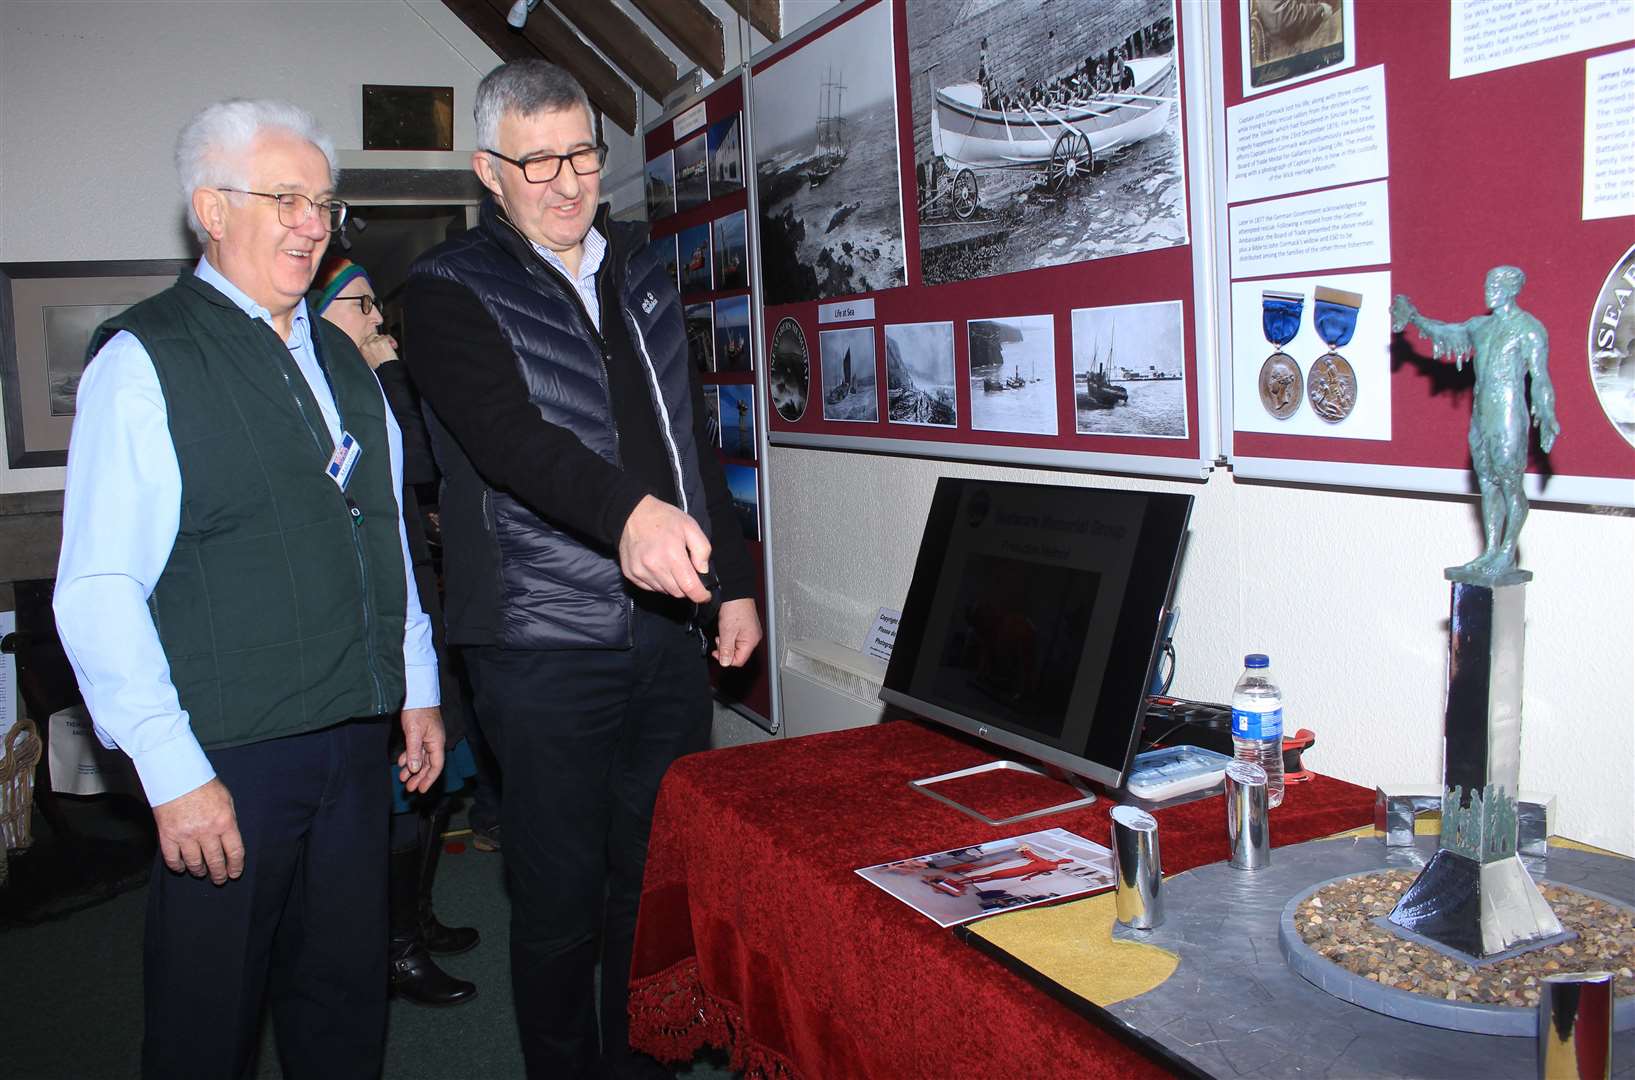 Willie Watt of the Seafarers Memorial Group with Malcolm Bremner (left), vice-chairman of the Wick Society, at the museum open day. Picture: Alan Hendry